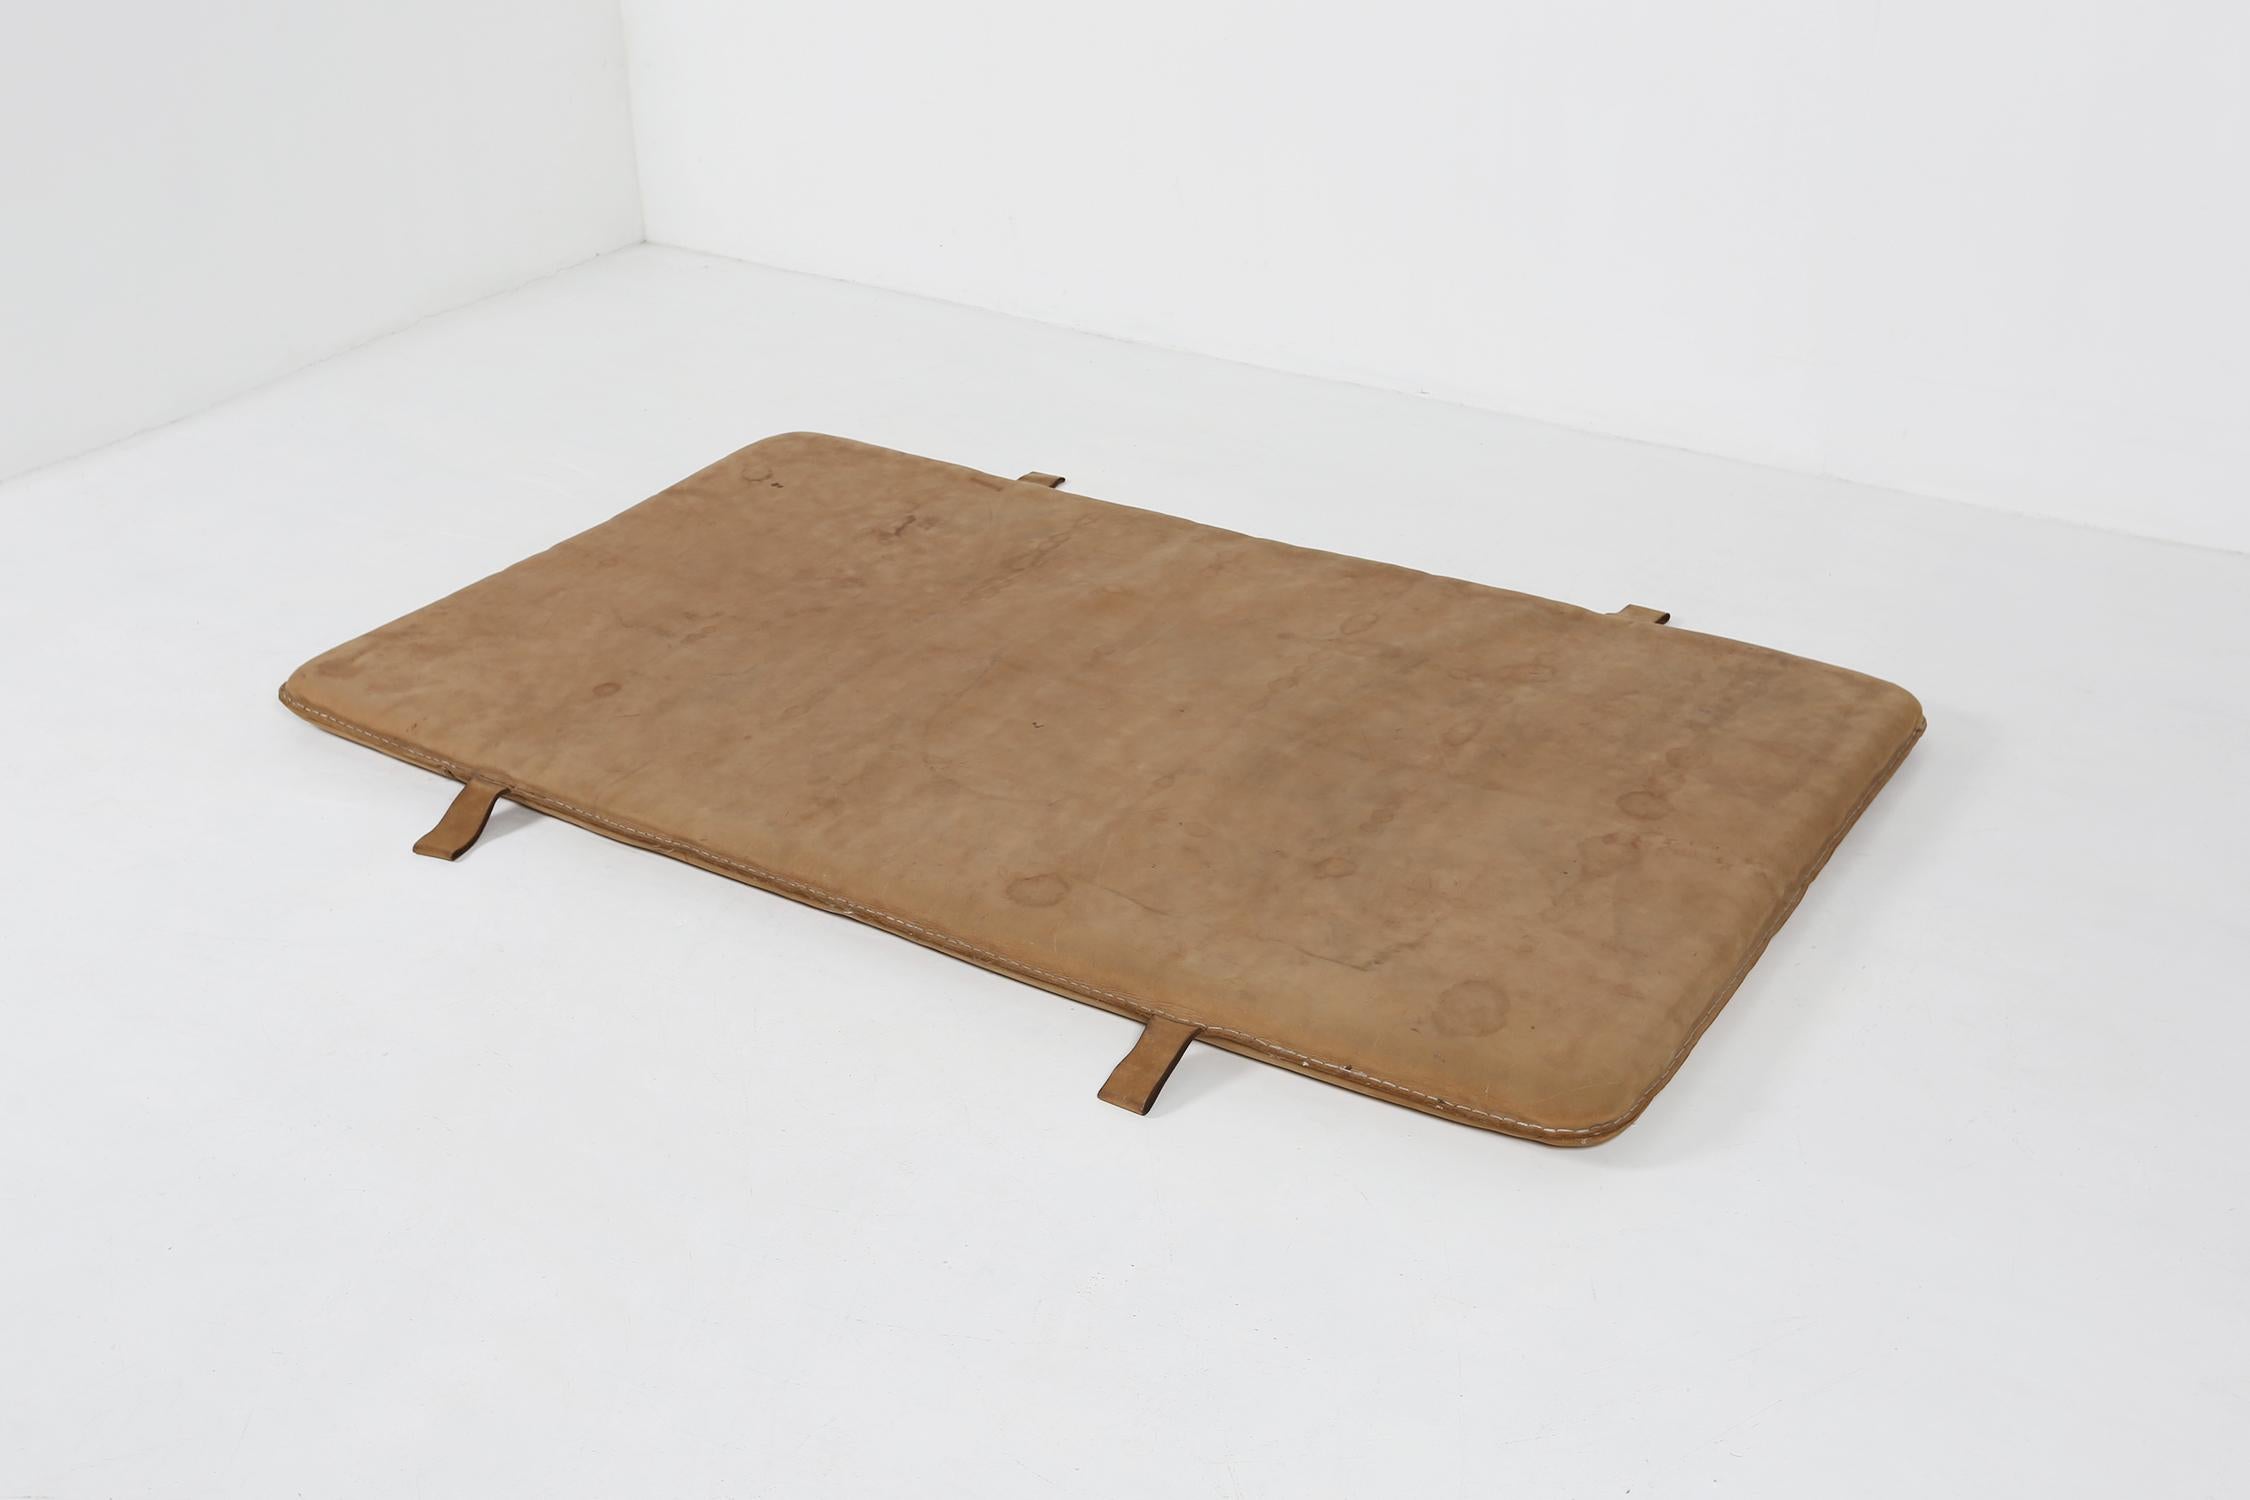 Leather gym mat ca.1930 Belgium.
Made from thick but soft leather.
With a very nice patina.